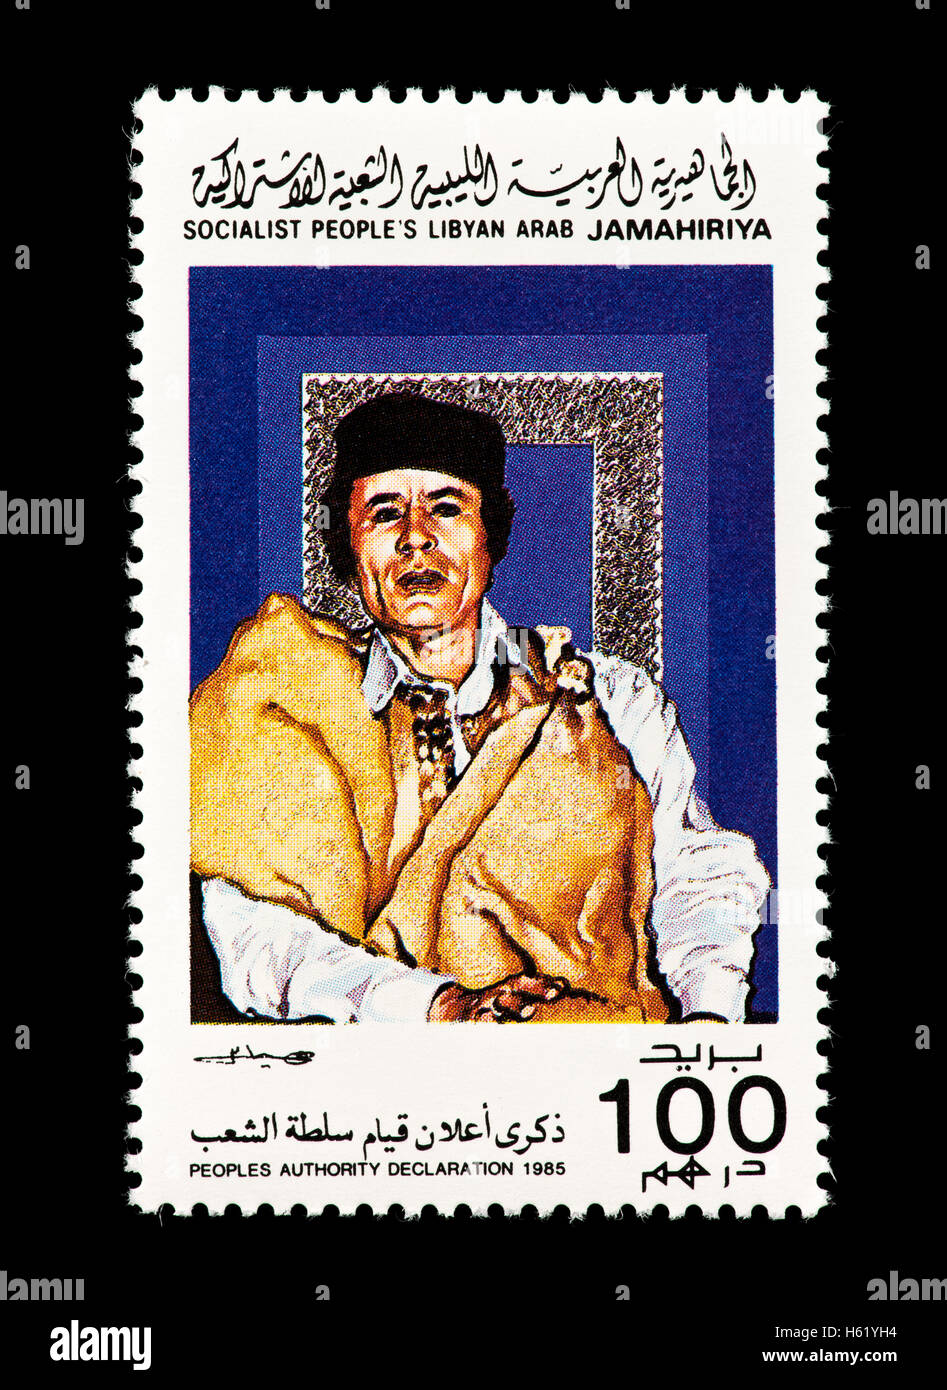 Postage stamp from Libya depicting Khadafy in local costume. Stock Photo